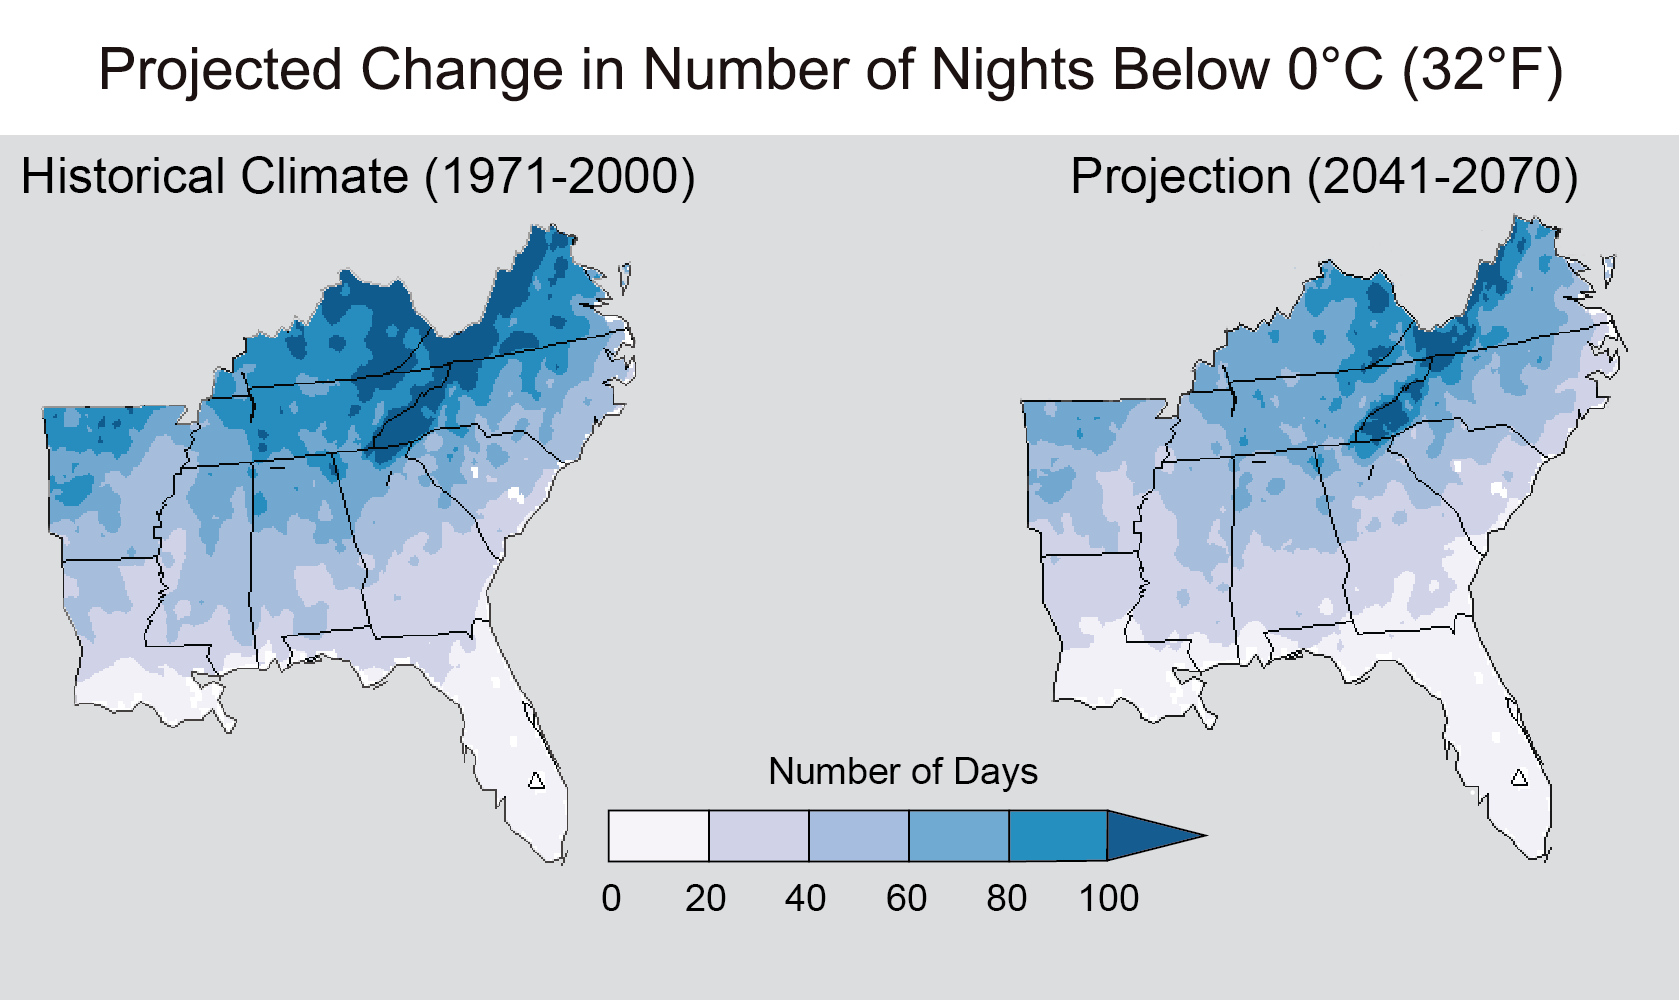 Maps of the southeastern US showing the number of nights below freezing between 1971 and 2000 and the projected number of nights below freezing between 2041 and 2070.